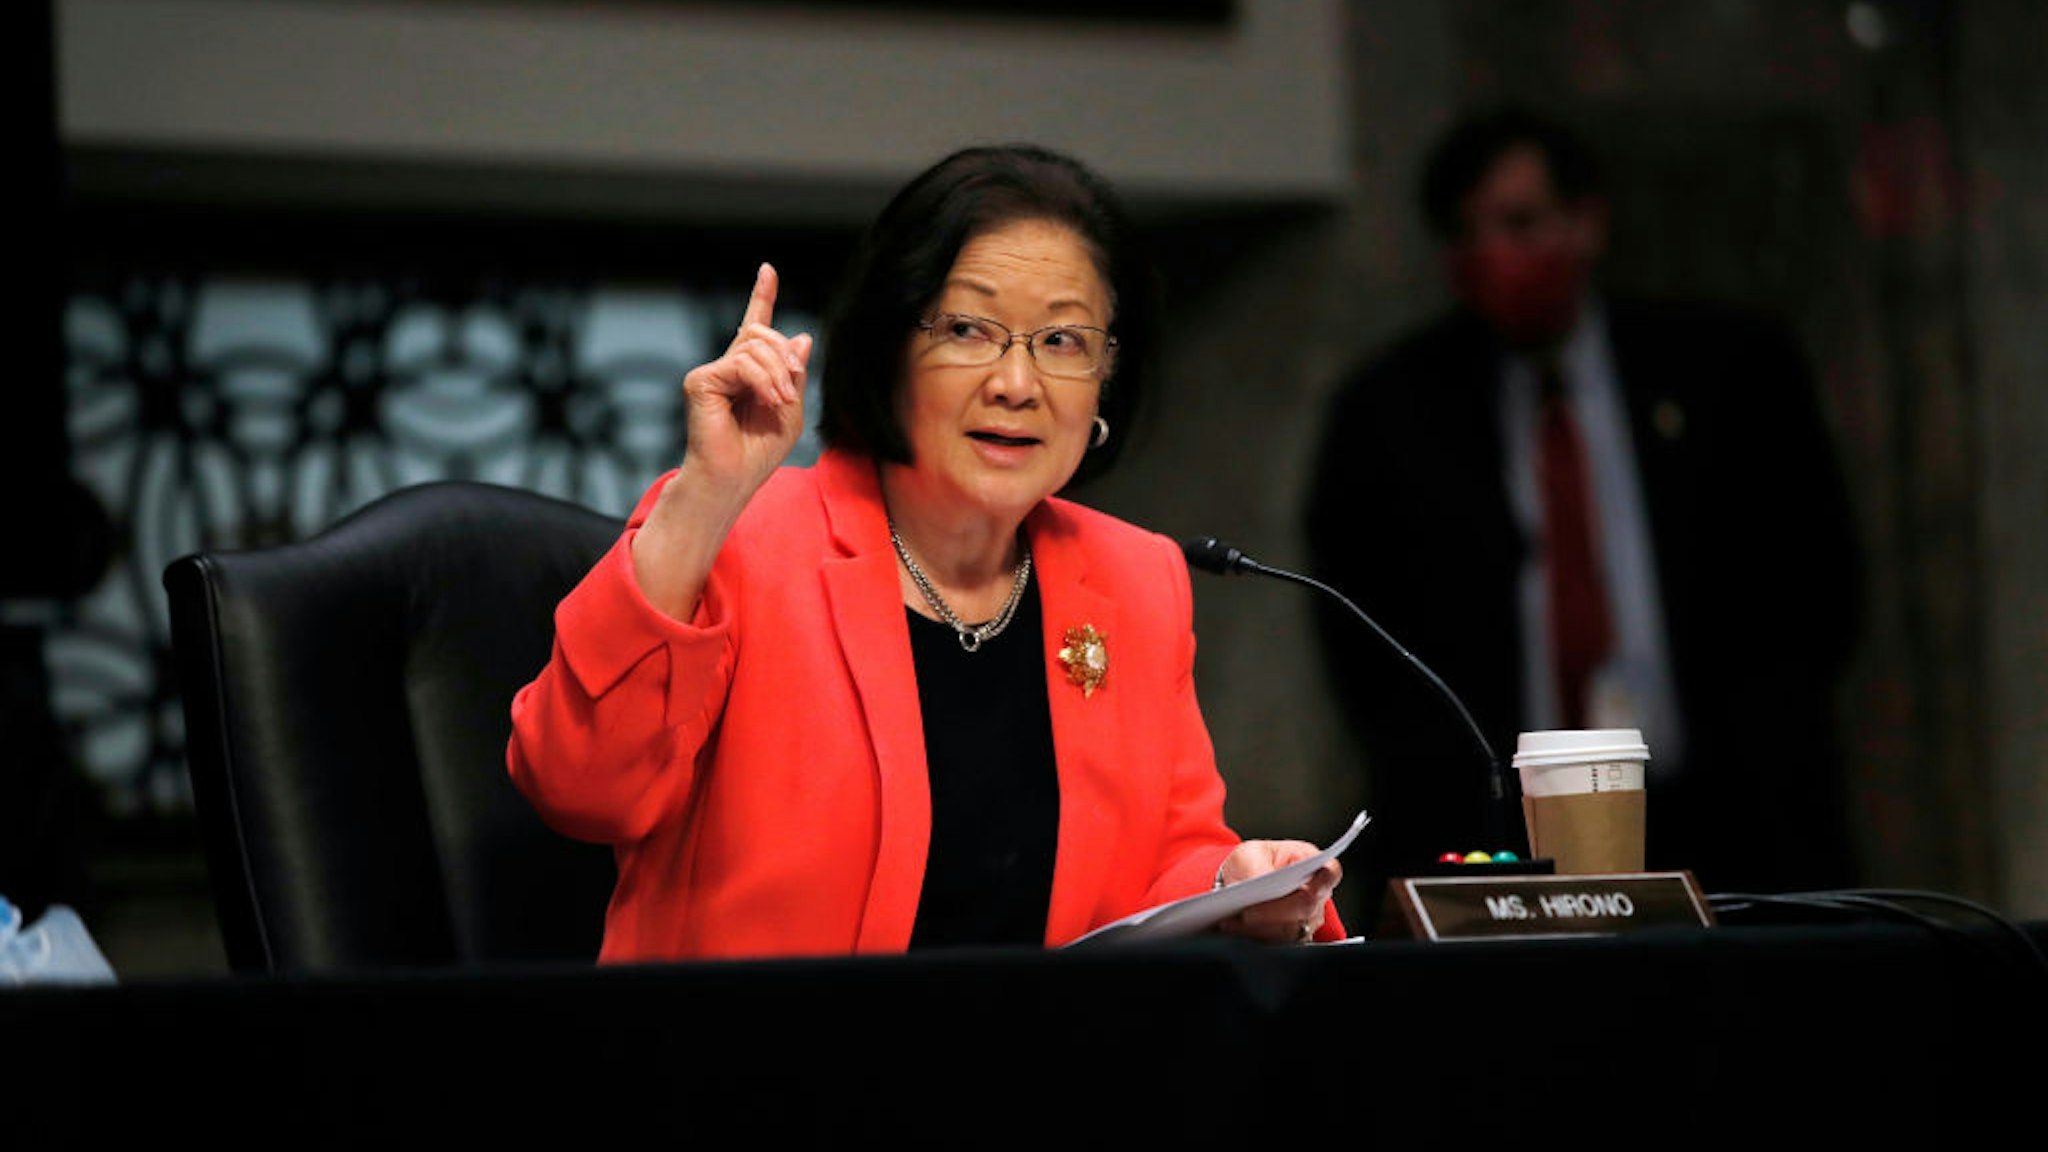 WASHINGTON, DC - JUNE 11: U.S. Sen. Mazie Hirono (D-HI) speaks at a hearing of the Judiciary Committee considering authorization for subpoenas relating to the Crossfire Hurricane investigation on June 11, 2020 in Washington, DC. Crossfire Hurricane was the code name for the FBI counterintelligence investigation that looked into links between Trump associates and Russian officials in the 2016 presidential election. (Photo by Carolyn Kaster-Pool/Getty Images)